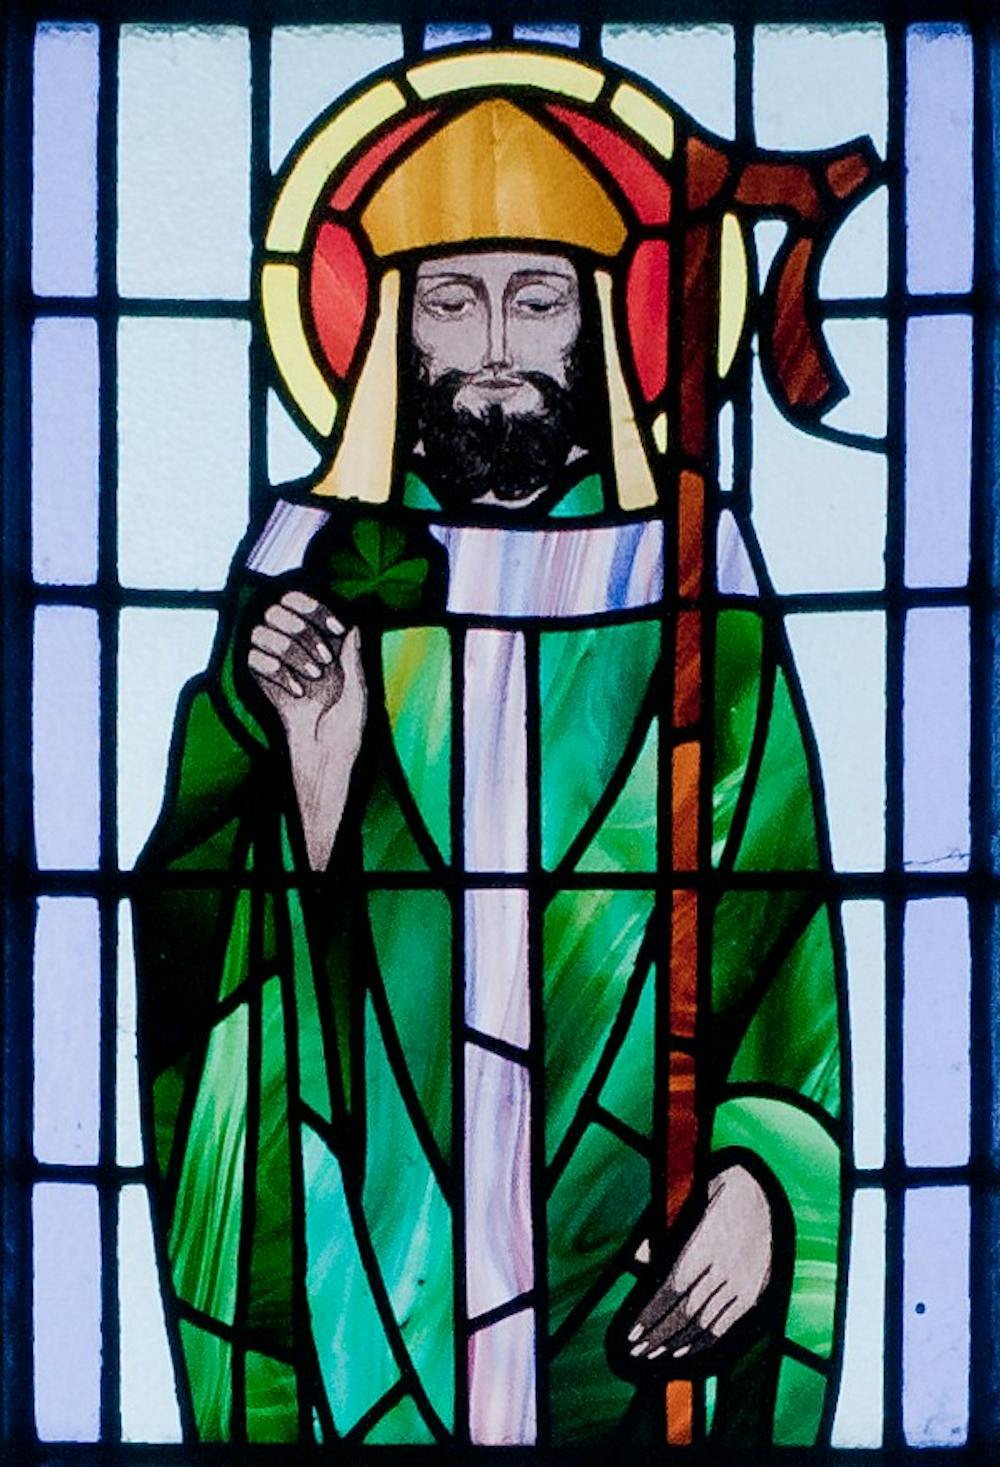 The origins of St. Patrick's Day